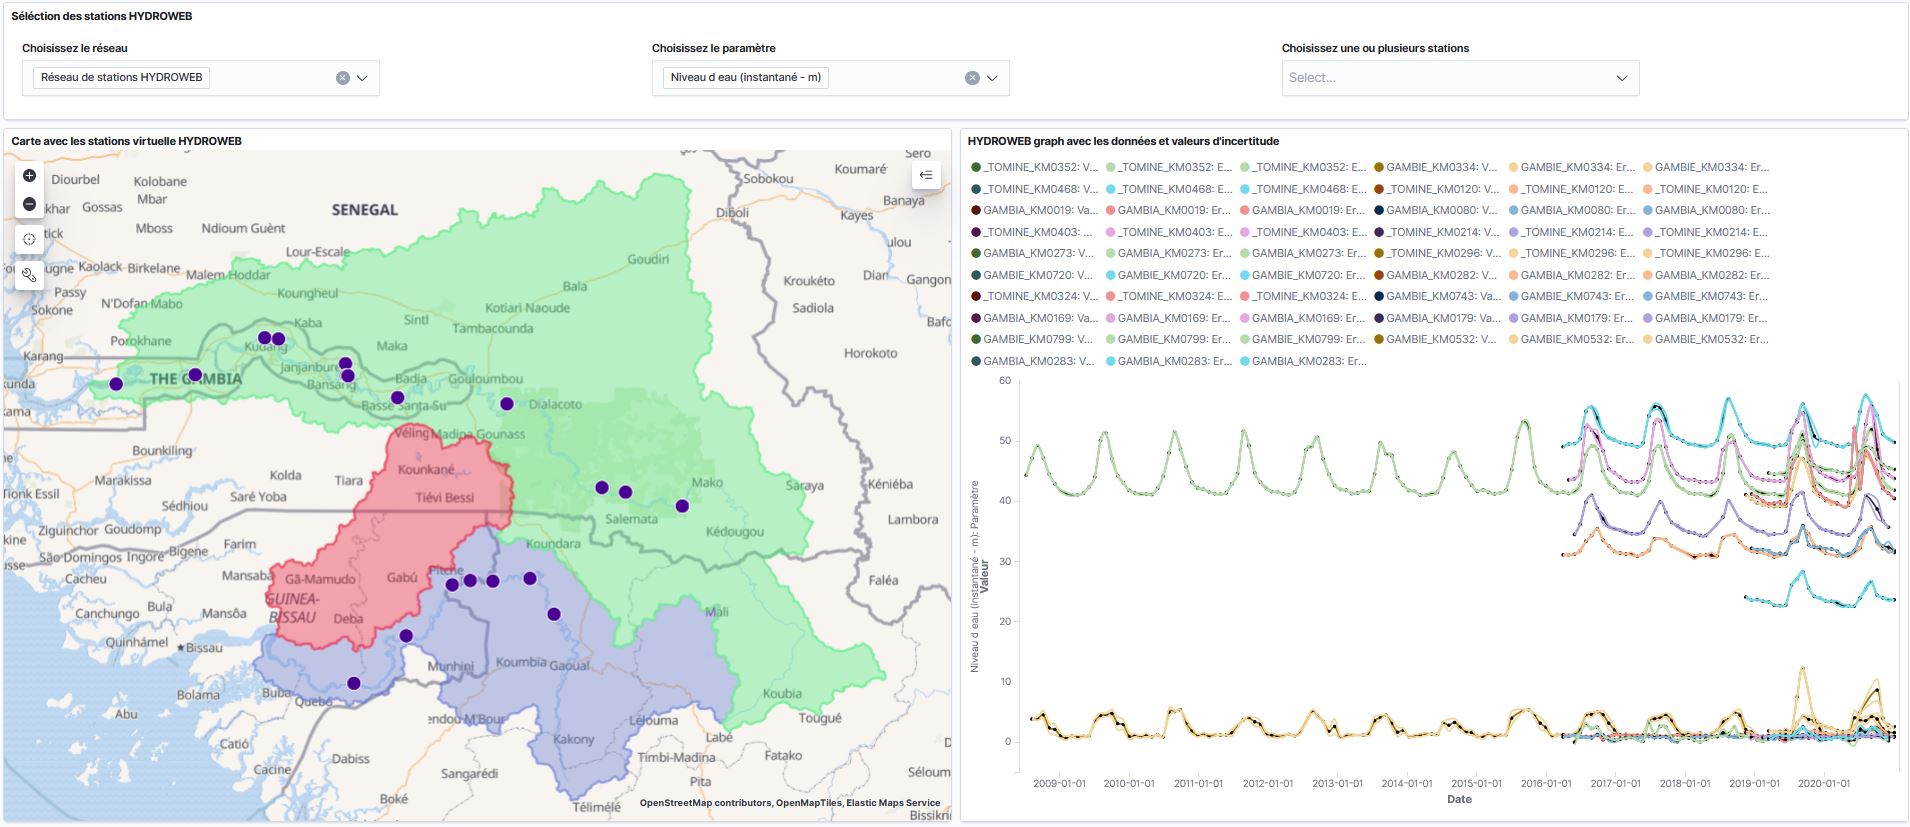 Dashboard - Hydrological data of virtual station with uncertainty (source : Hydroweb)